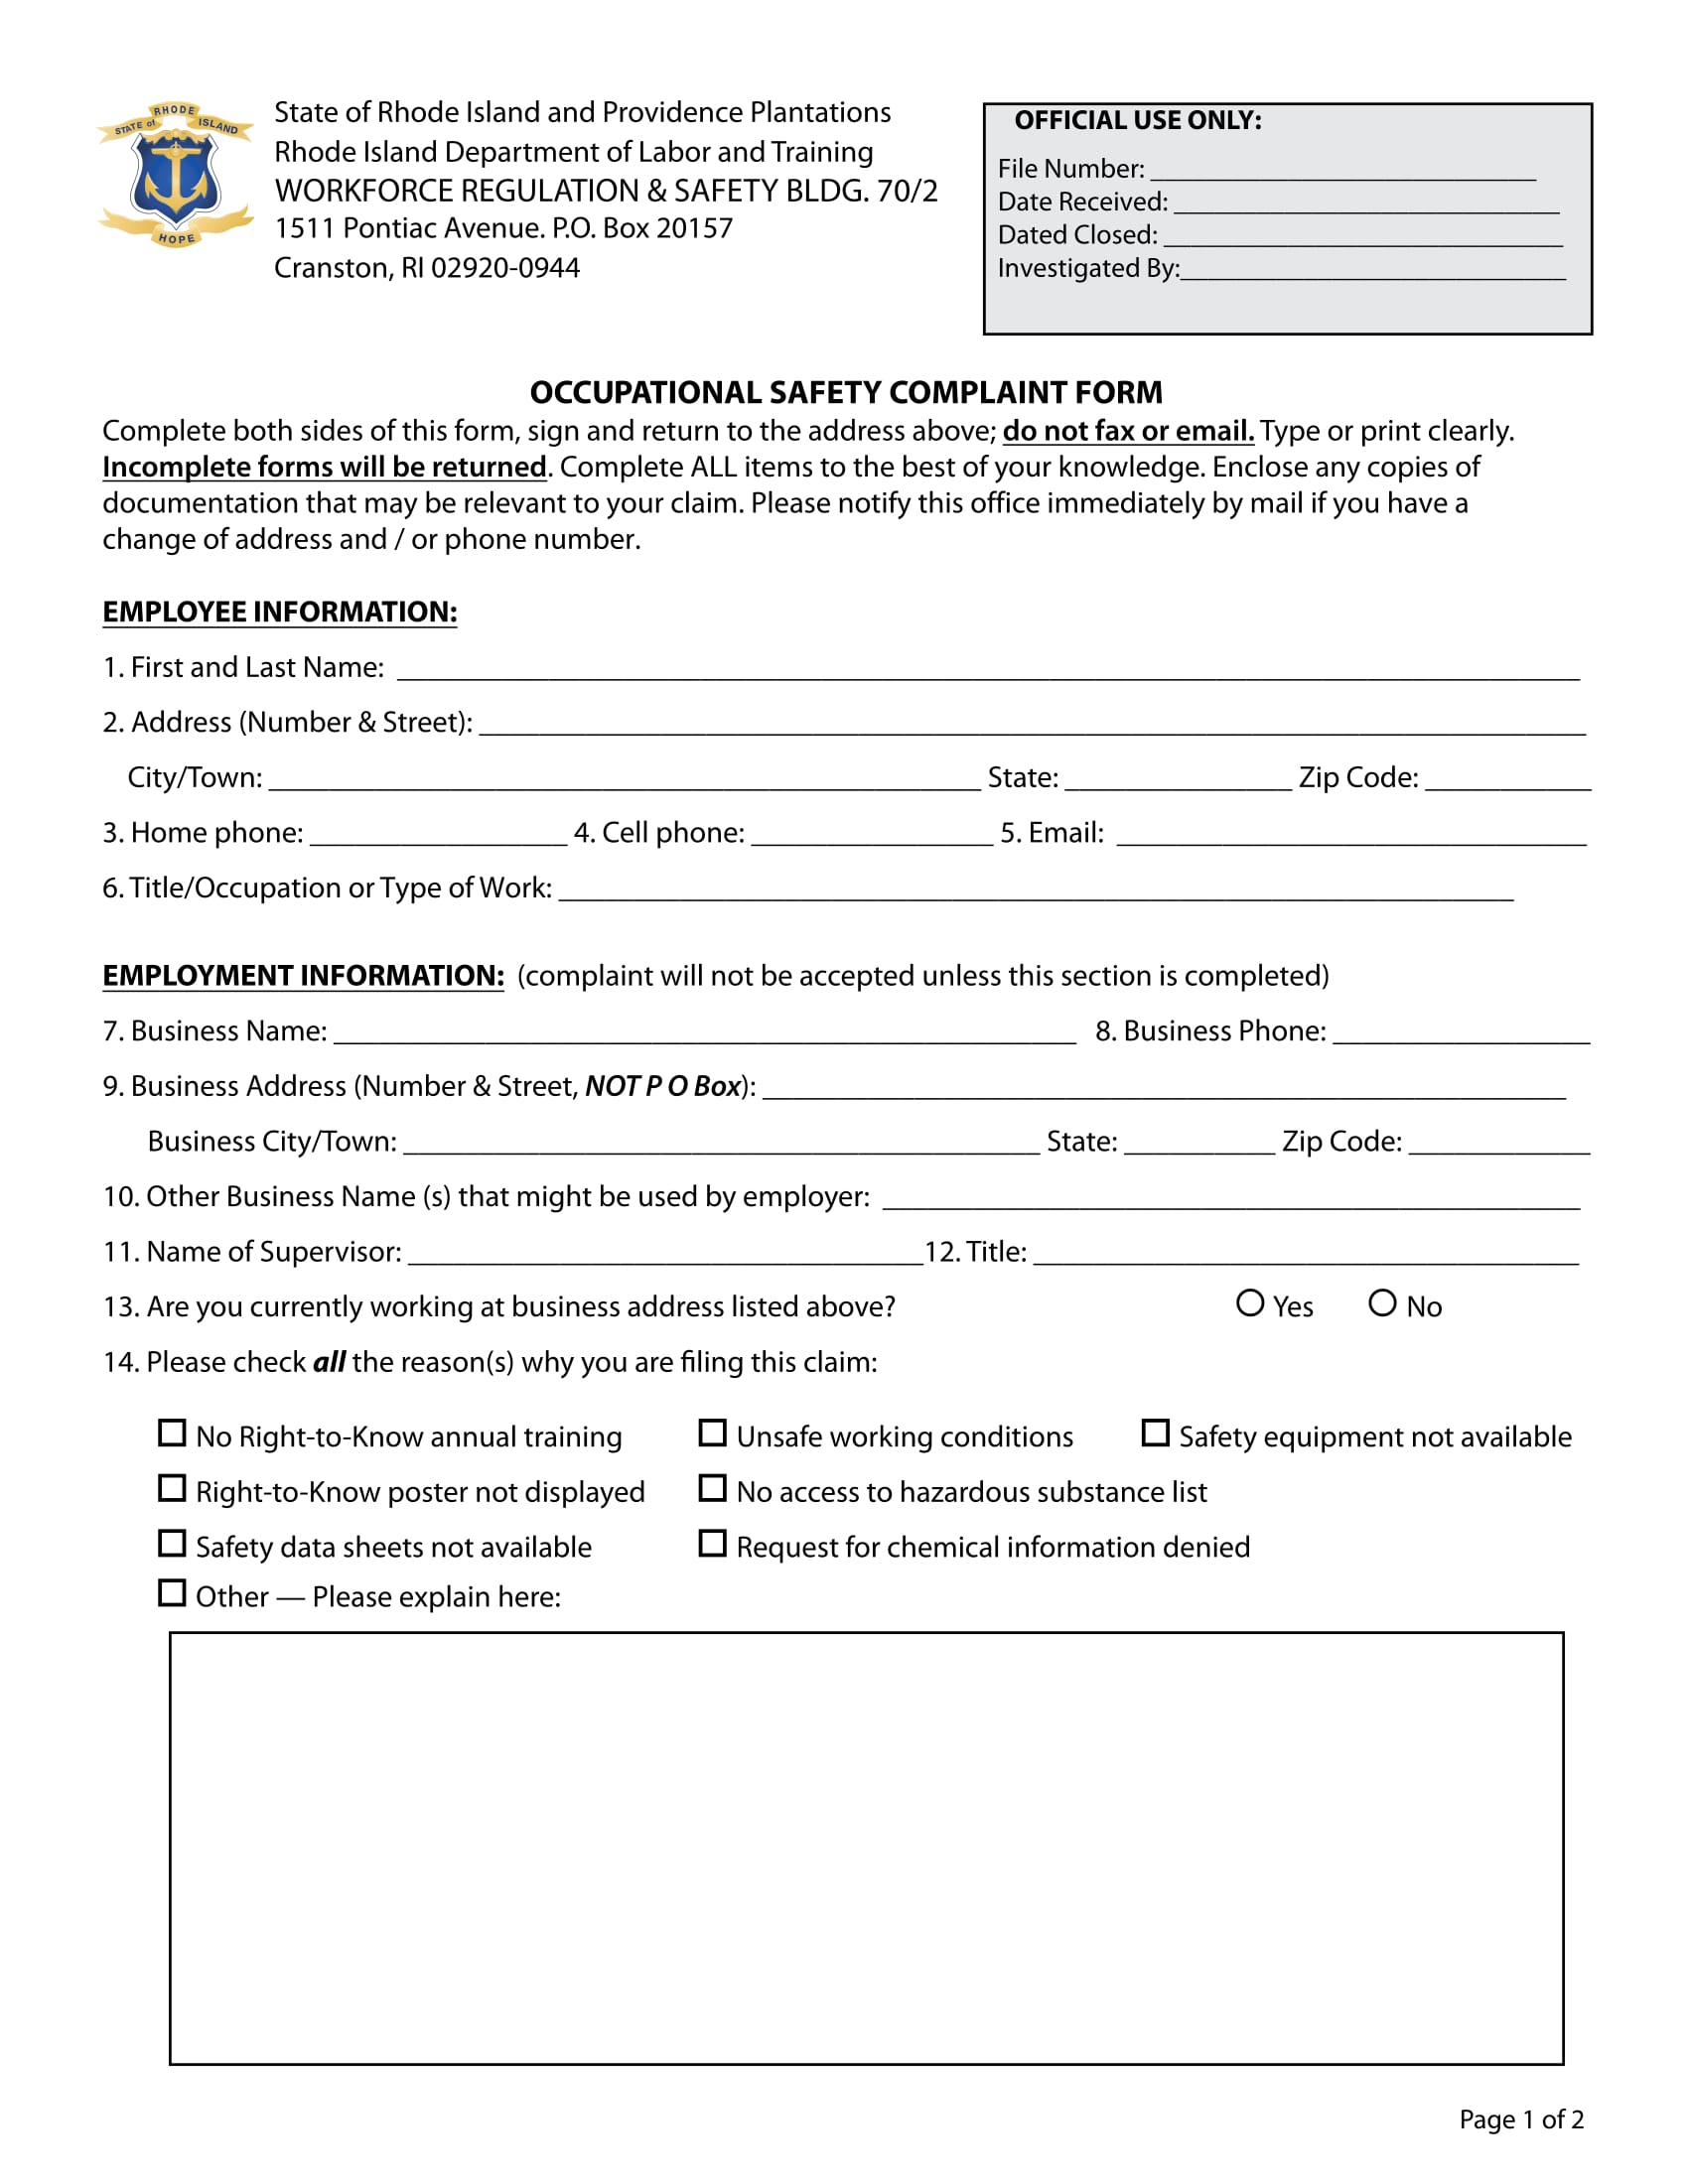 occupational safety complaint form 1